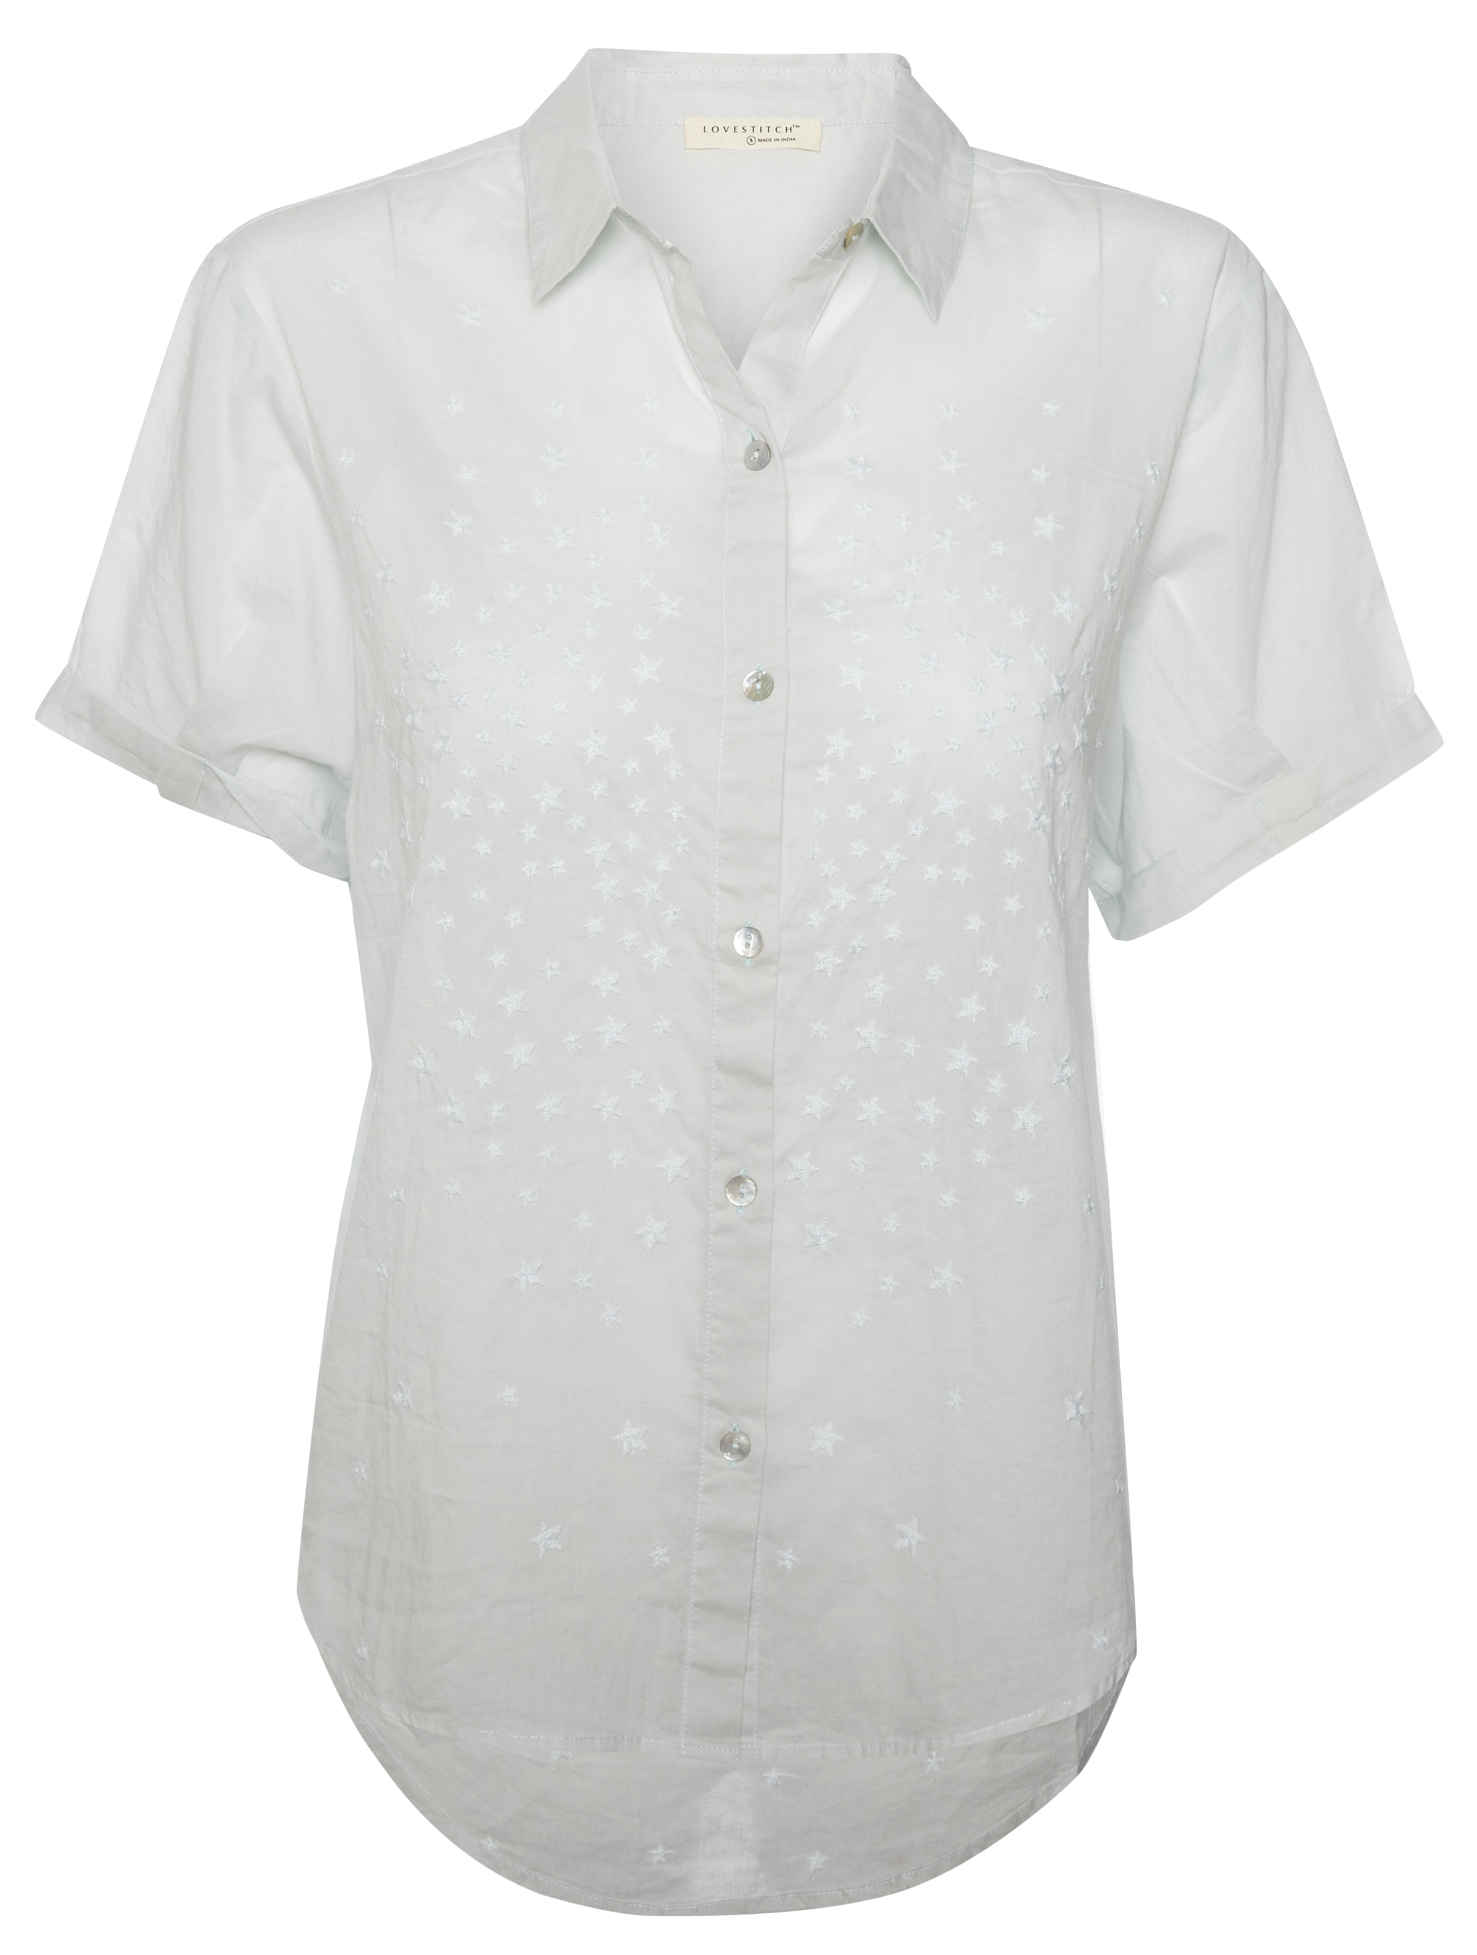 Star Embroidered Button Up Short Sleeve Top